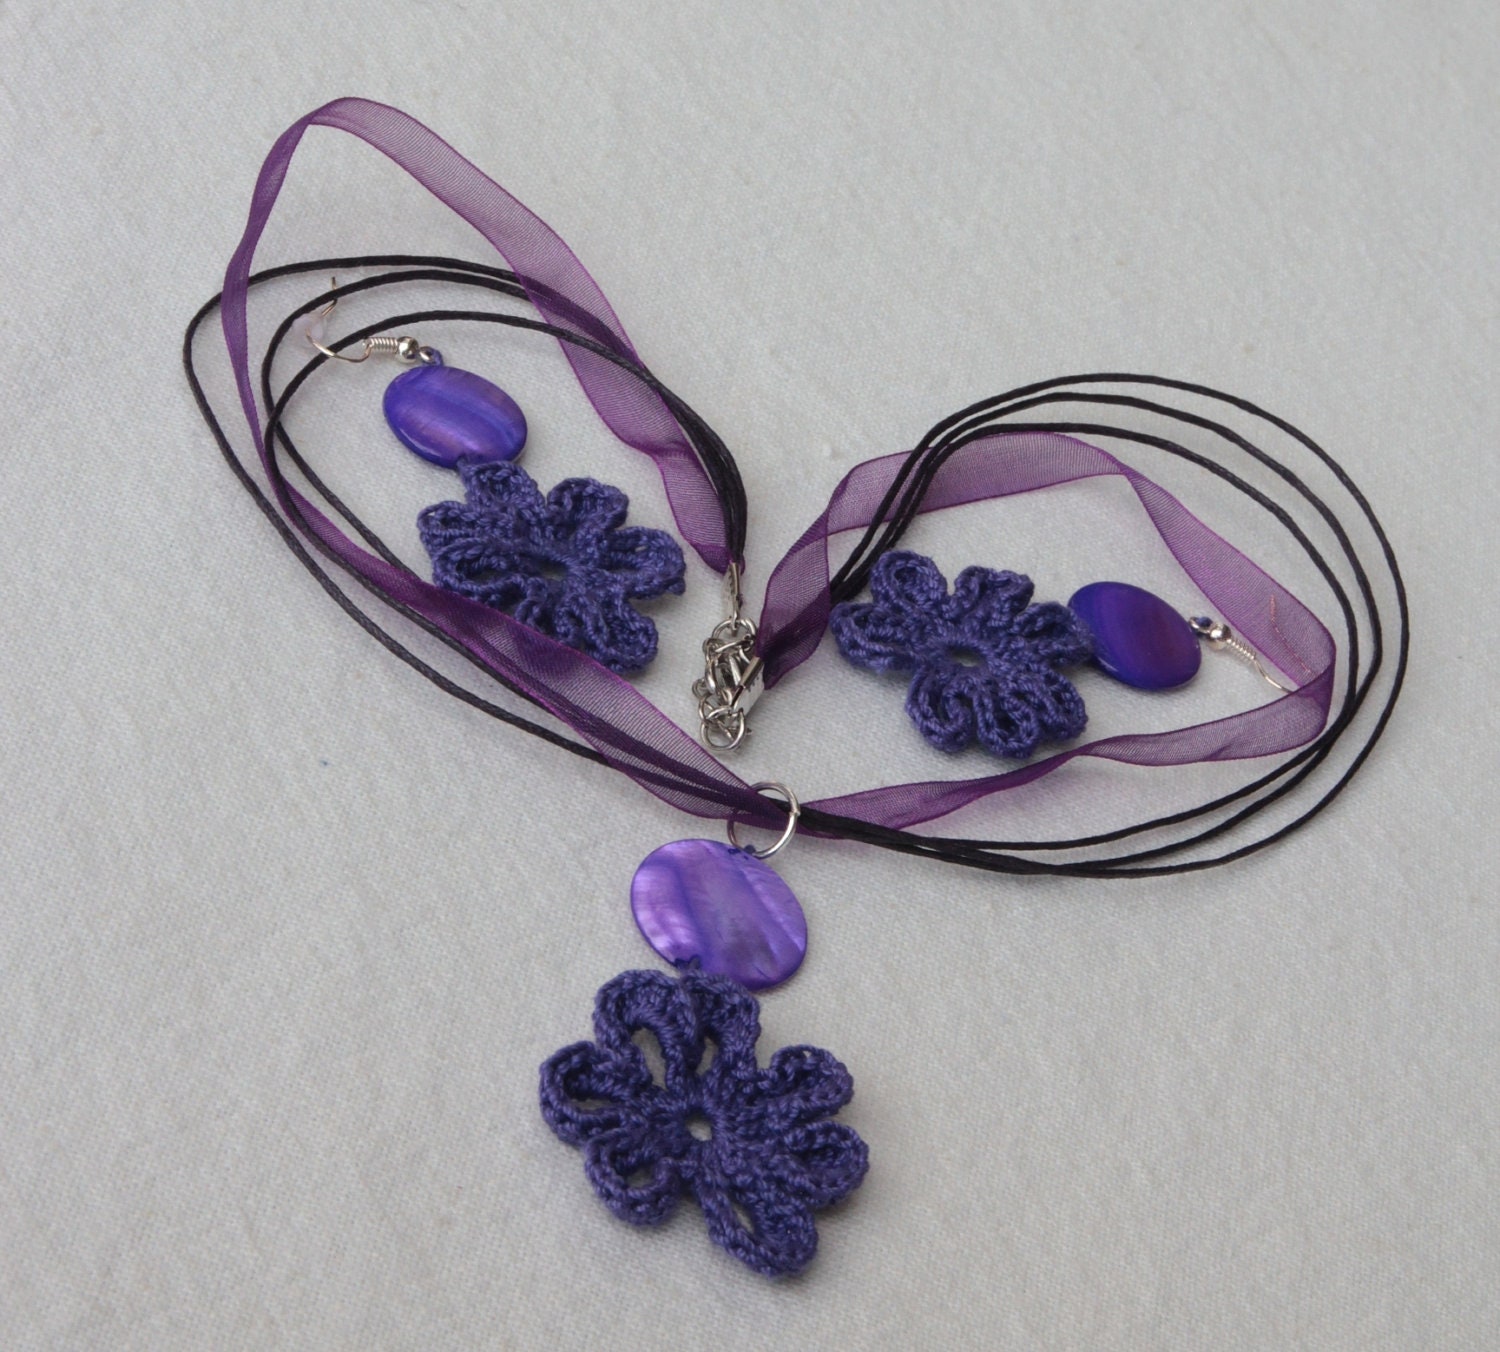 SALE - Violet crochet flower necklace and earrings with mother of pearl beads - IzabelkasJewelry